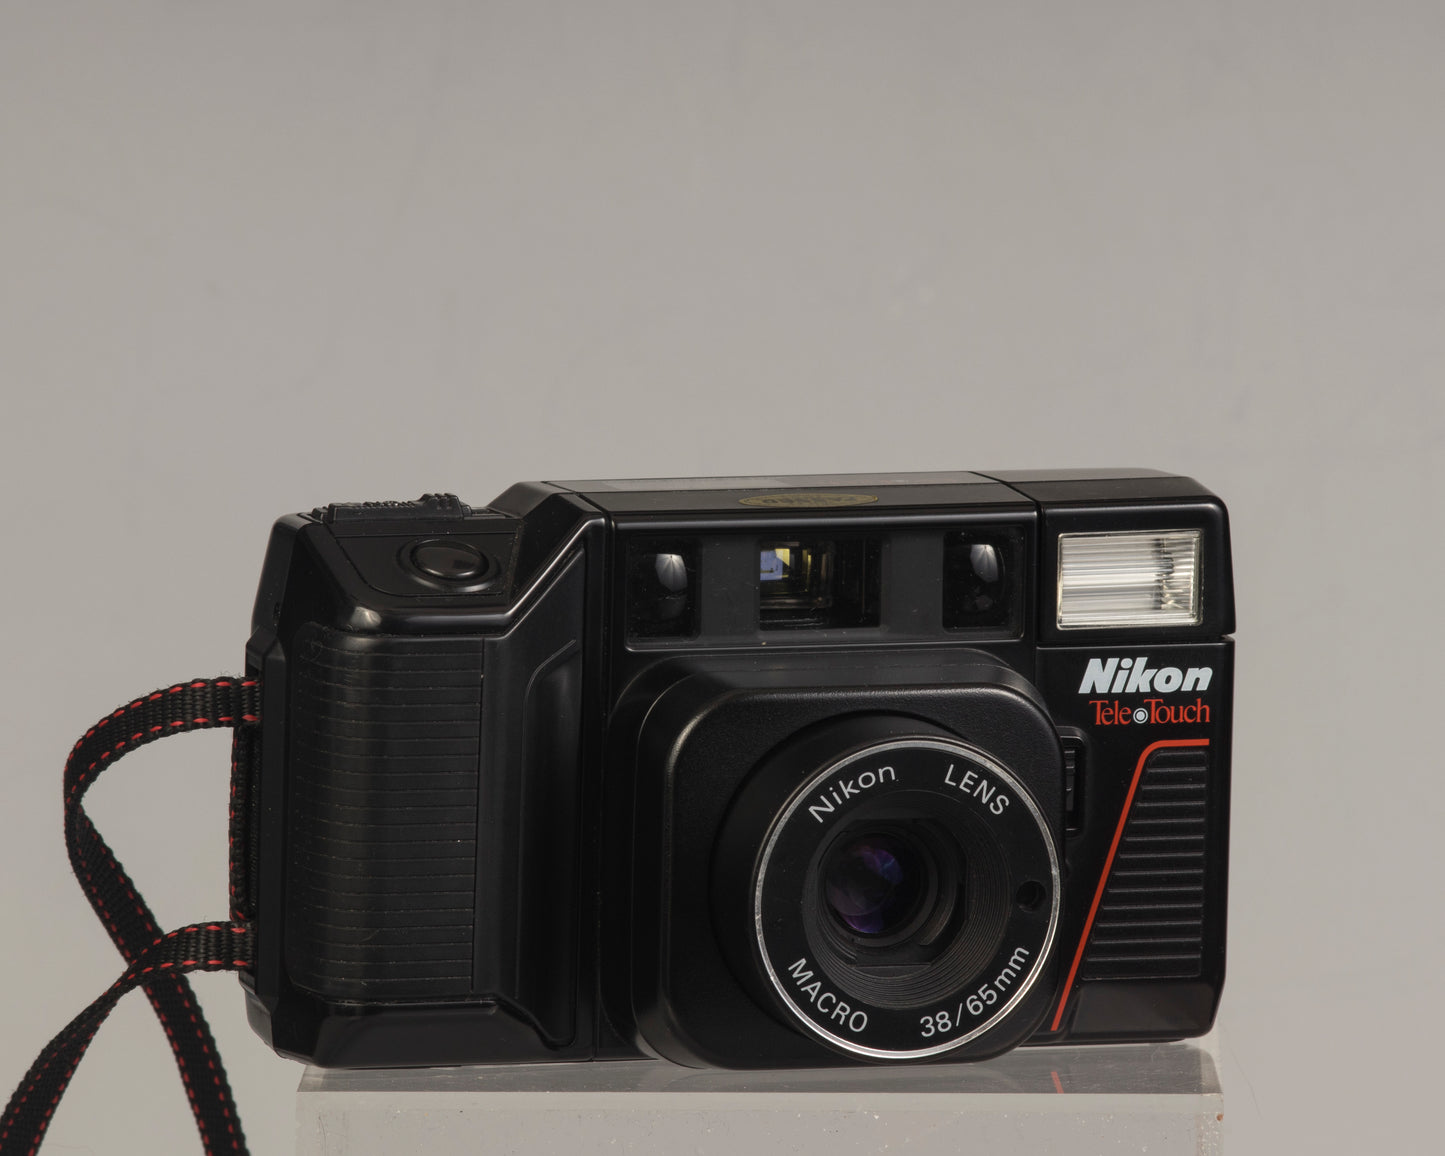 The Nikon Tele Touch (aka L35TWAF) front view 65mm mode; this is a classic twin lens 35mm point-and-shoot camera 